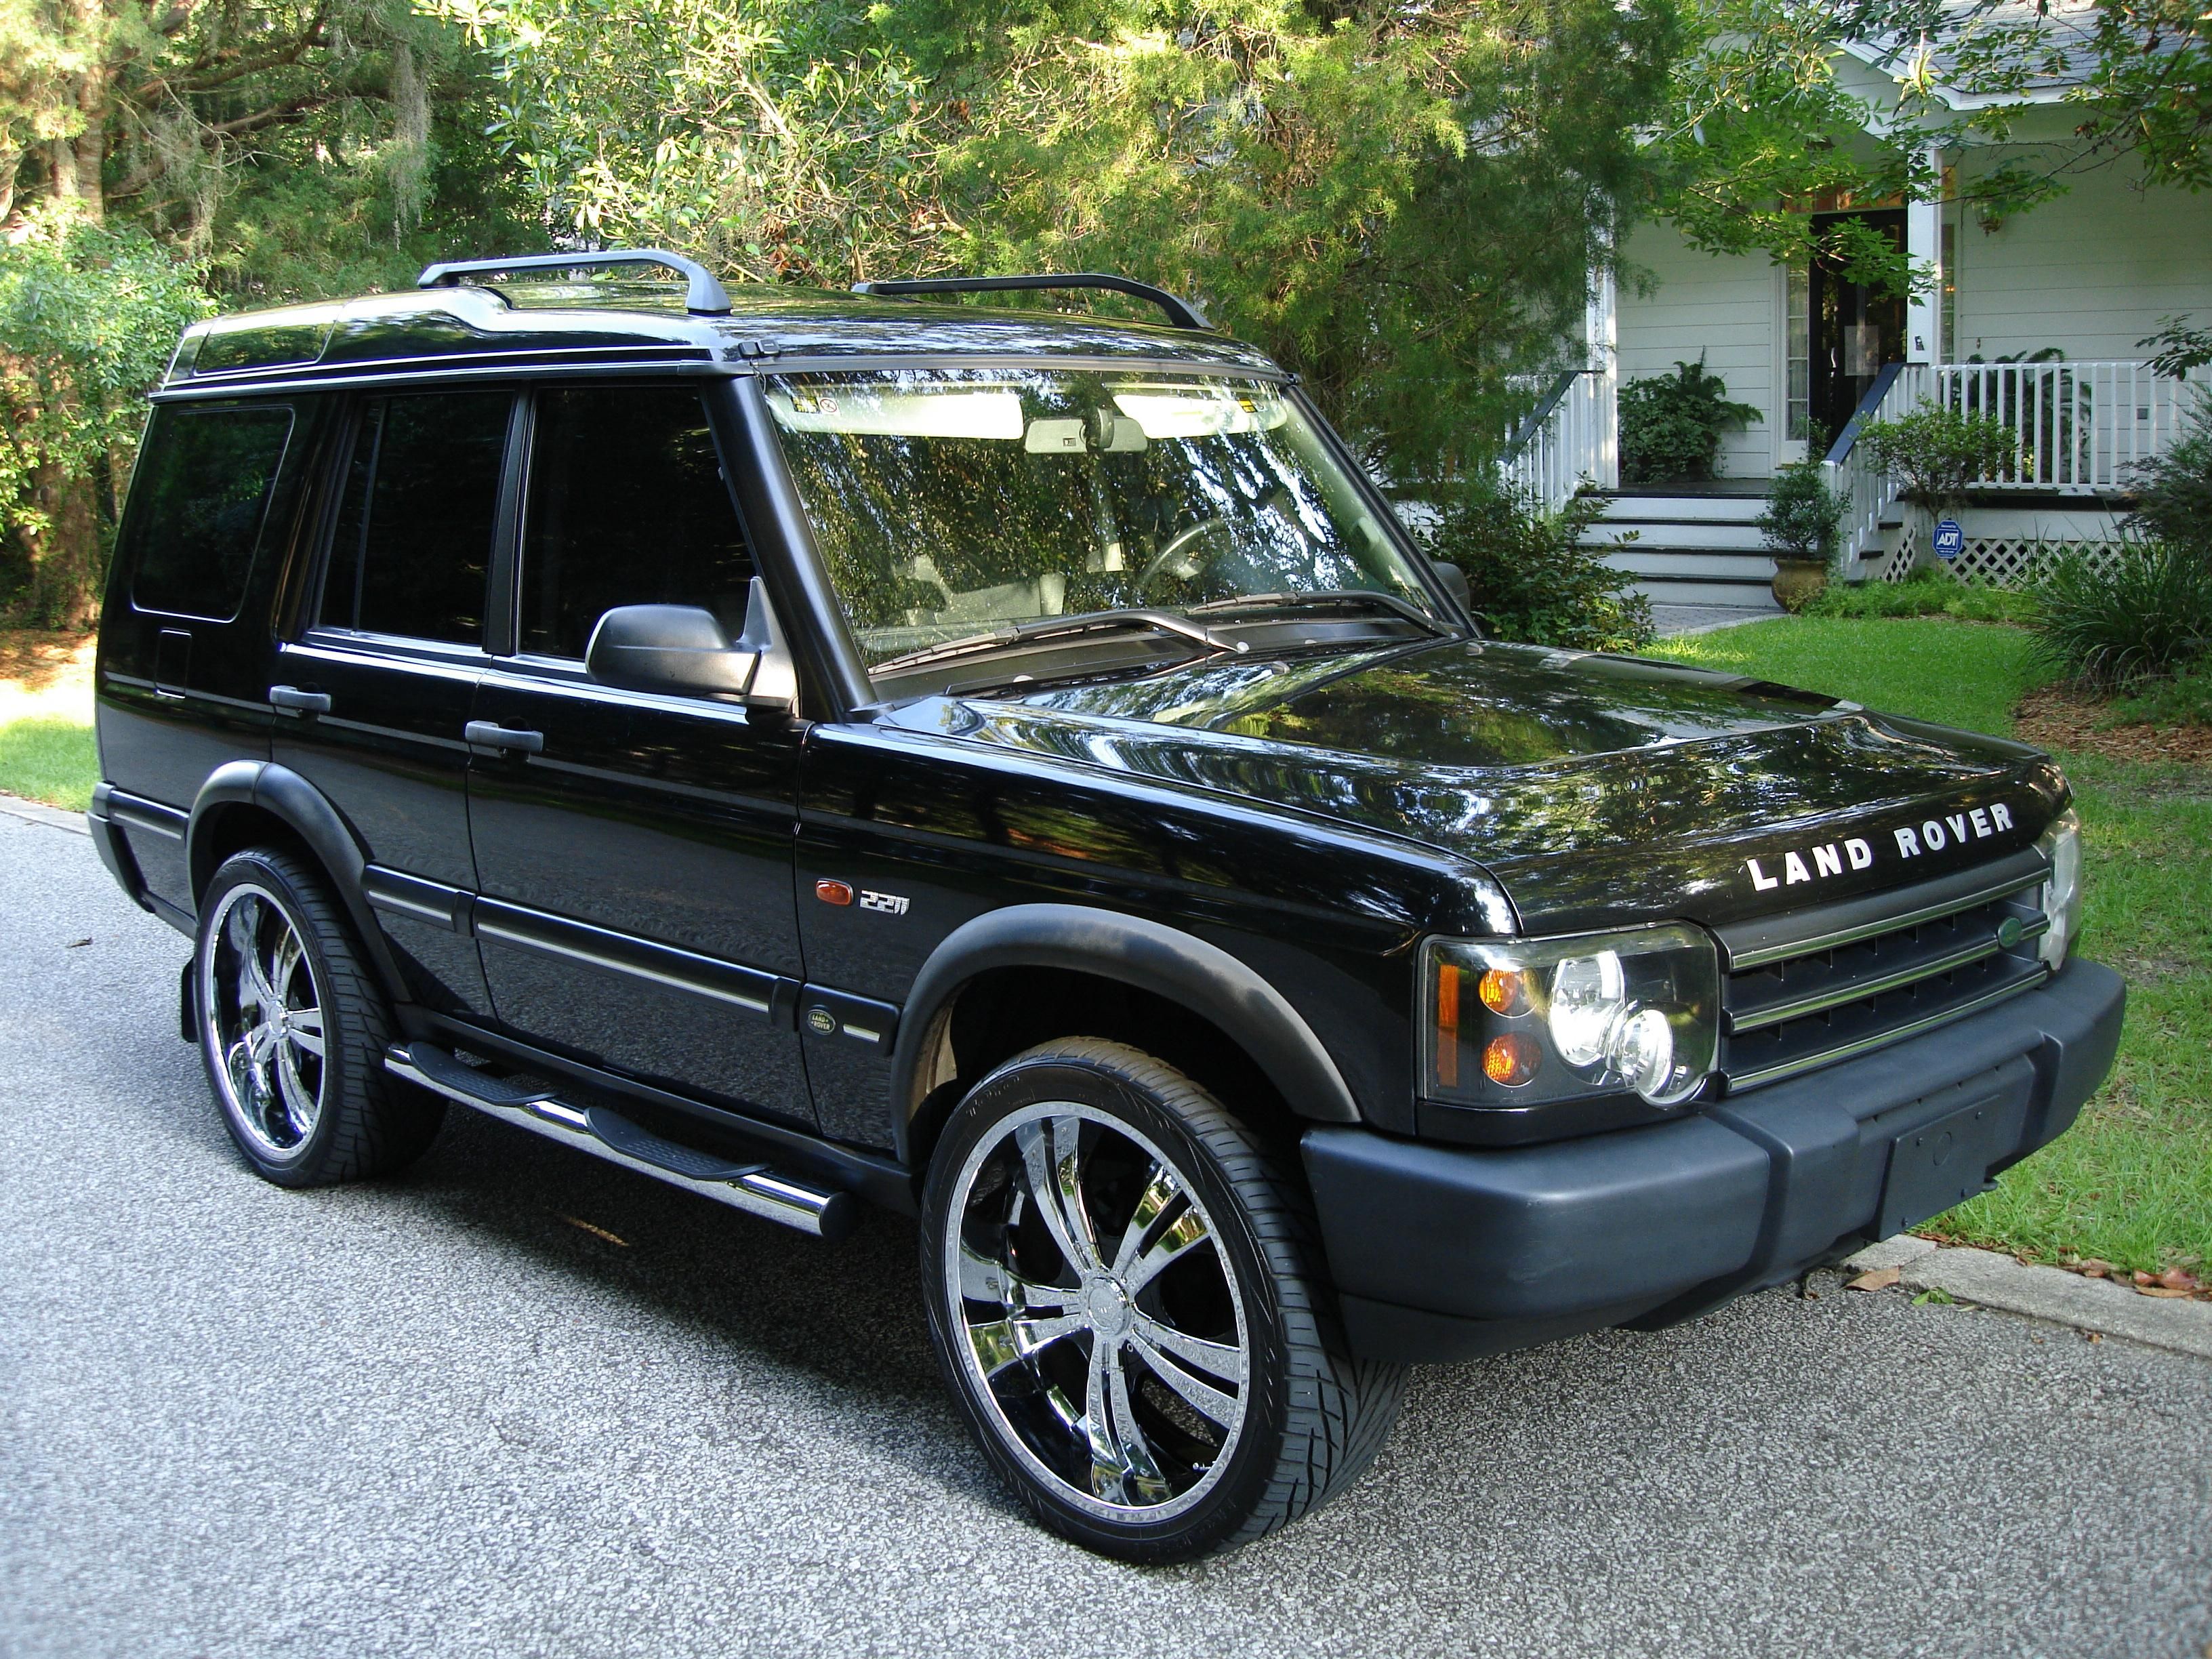 Https Www Hotcars Com Buying One Of These Suvs Is The Same As - 38599330001 original jpg